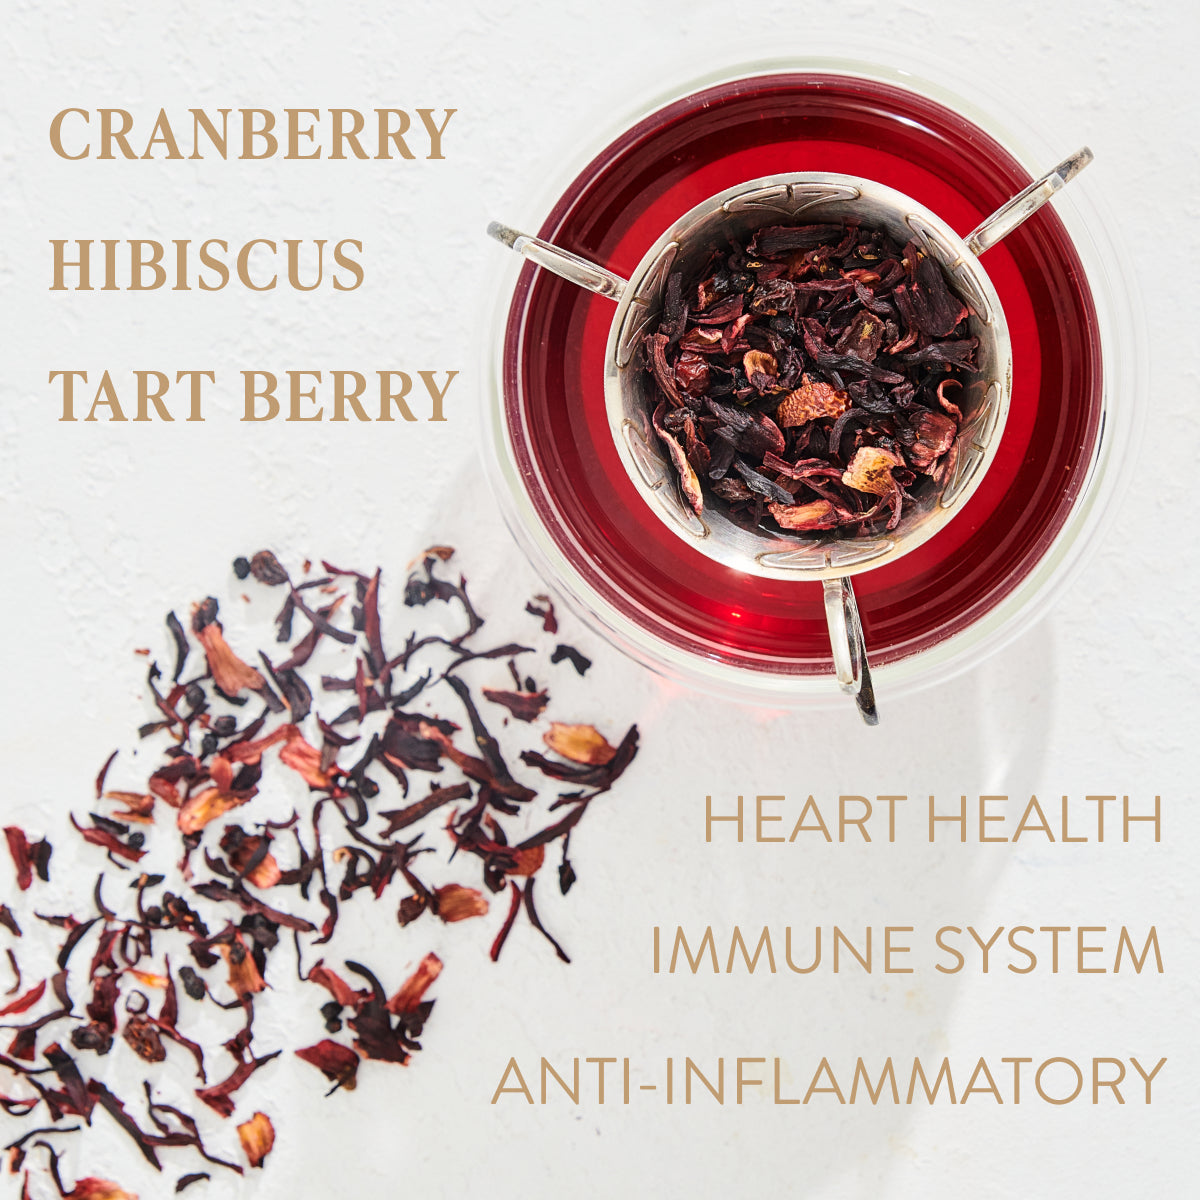 Overhead view of a glass of deep red tea with loose hibiscus and tart berry ingredients alongside it. The text reads "Cranberry Hibiscus Tart Berry" on the left and "Heart Health Immune System Anti-Inflammatory" on the right. Experience Ruby Moon™ : Hibiscus Elderberry Tea, a delightful Organic Loose Leaf blend for optimal wellness by Club Magic Hour.